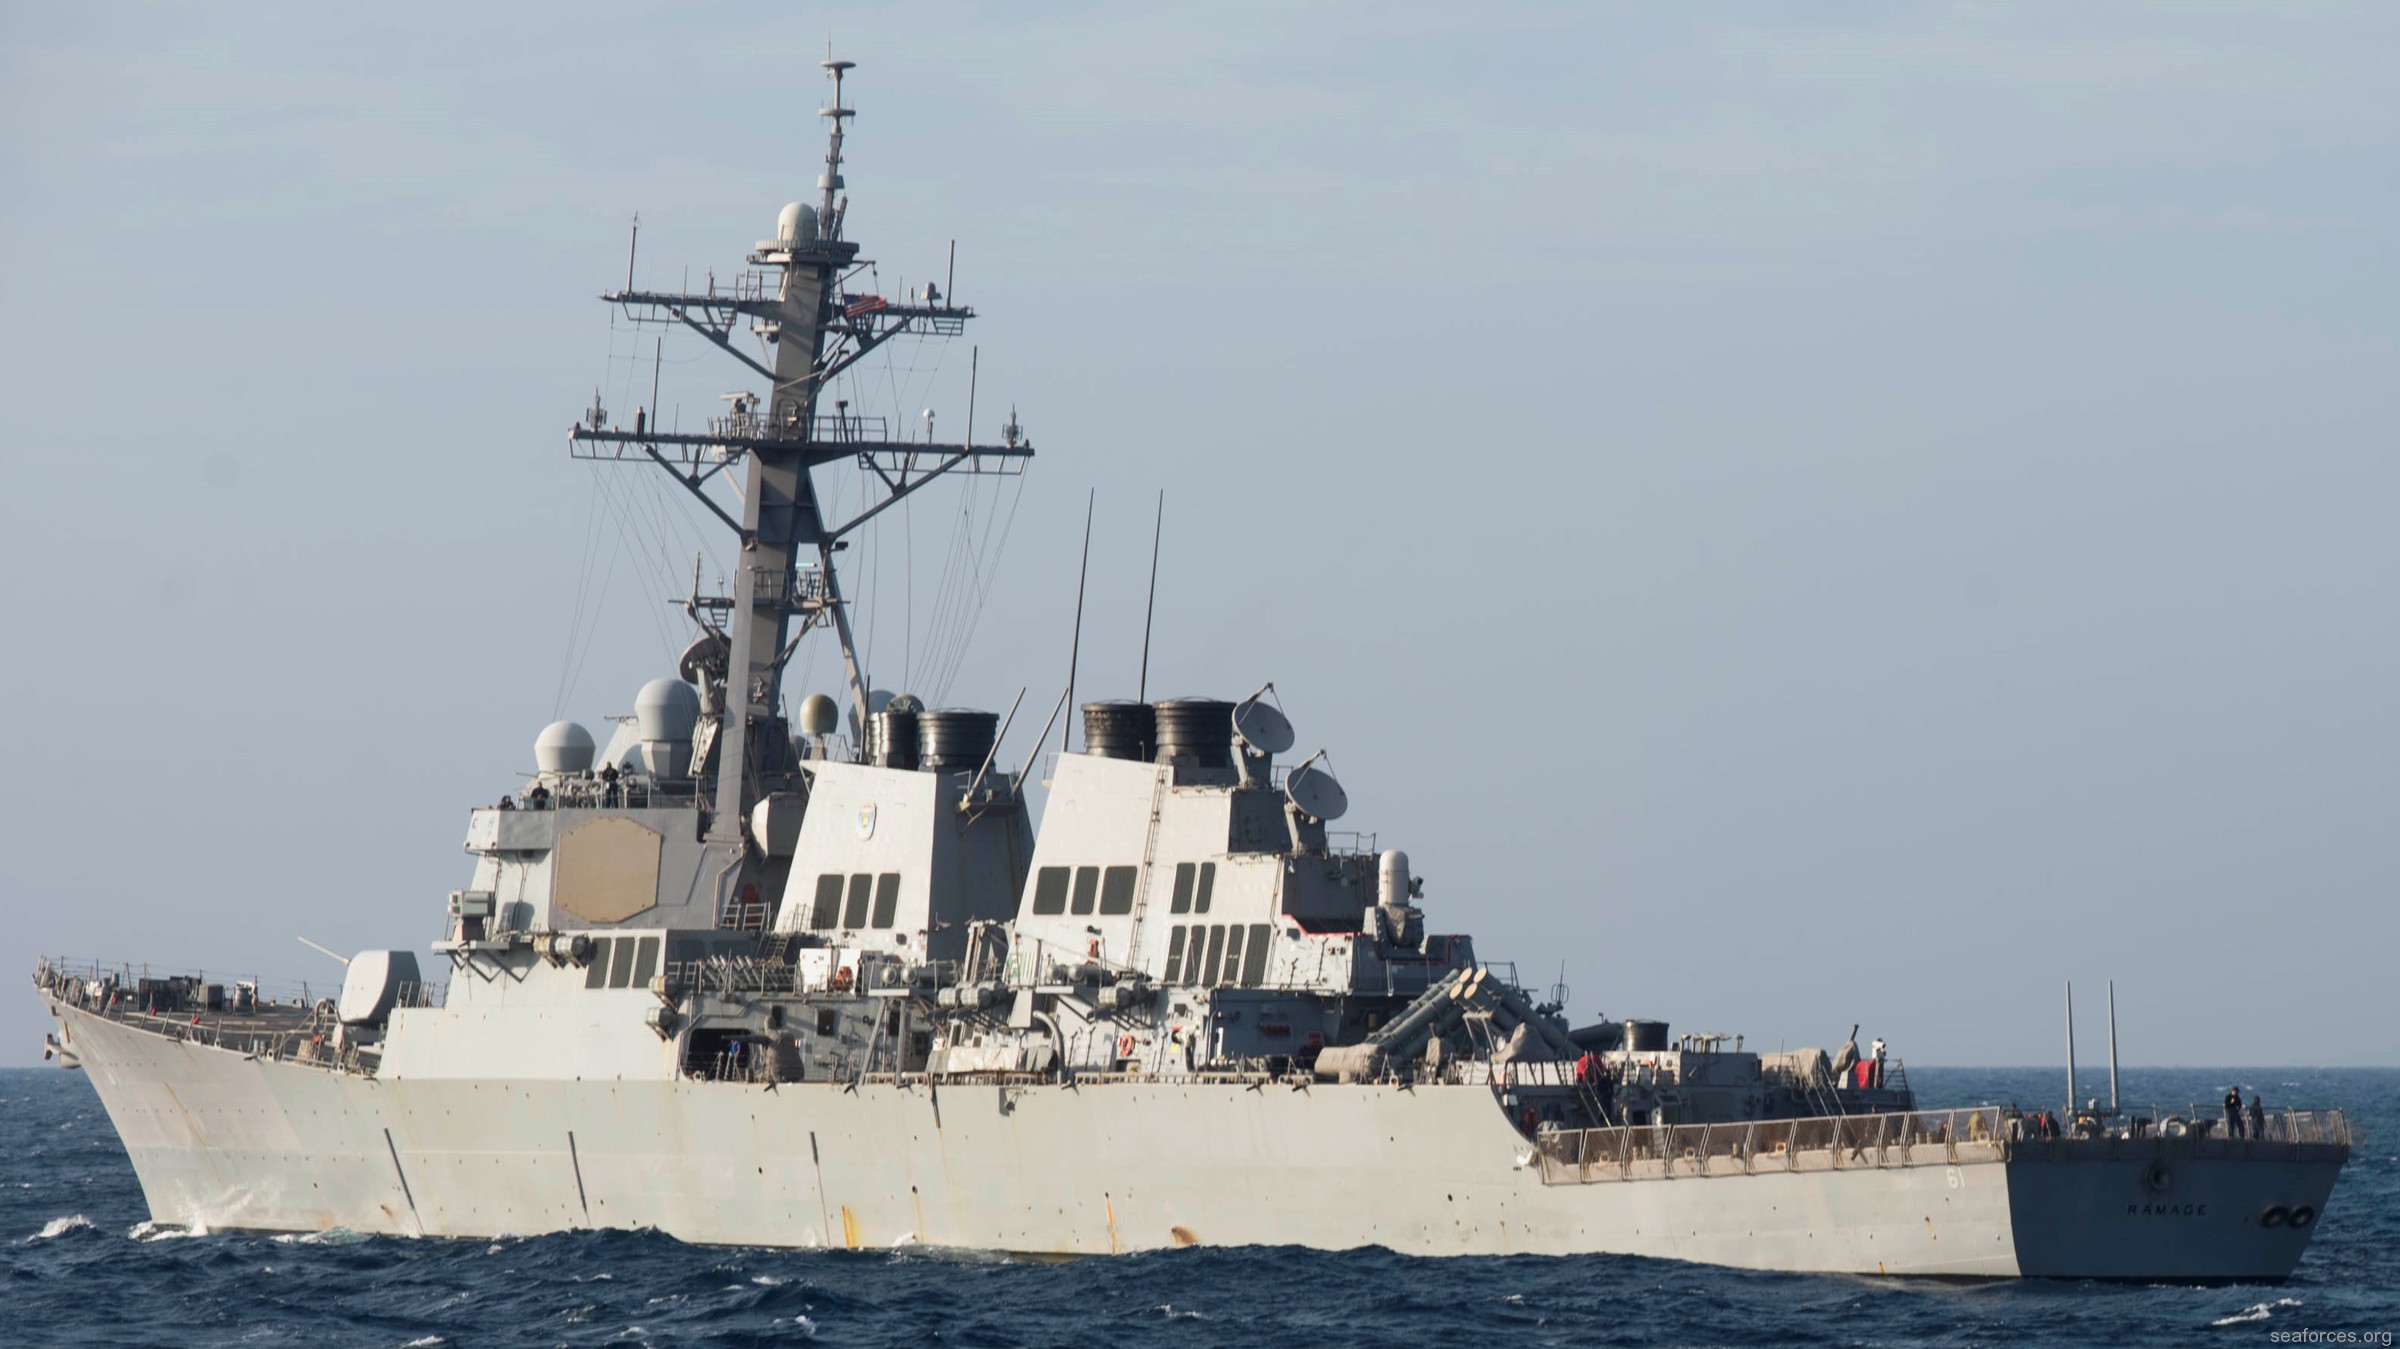 ddg-61 uss ramage guided missile destroyer us navy 22